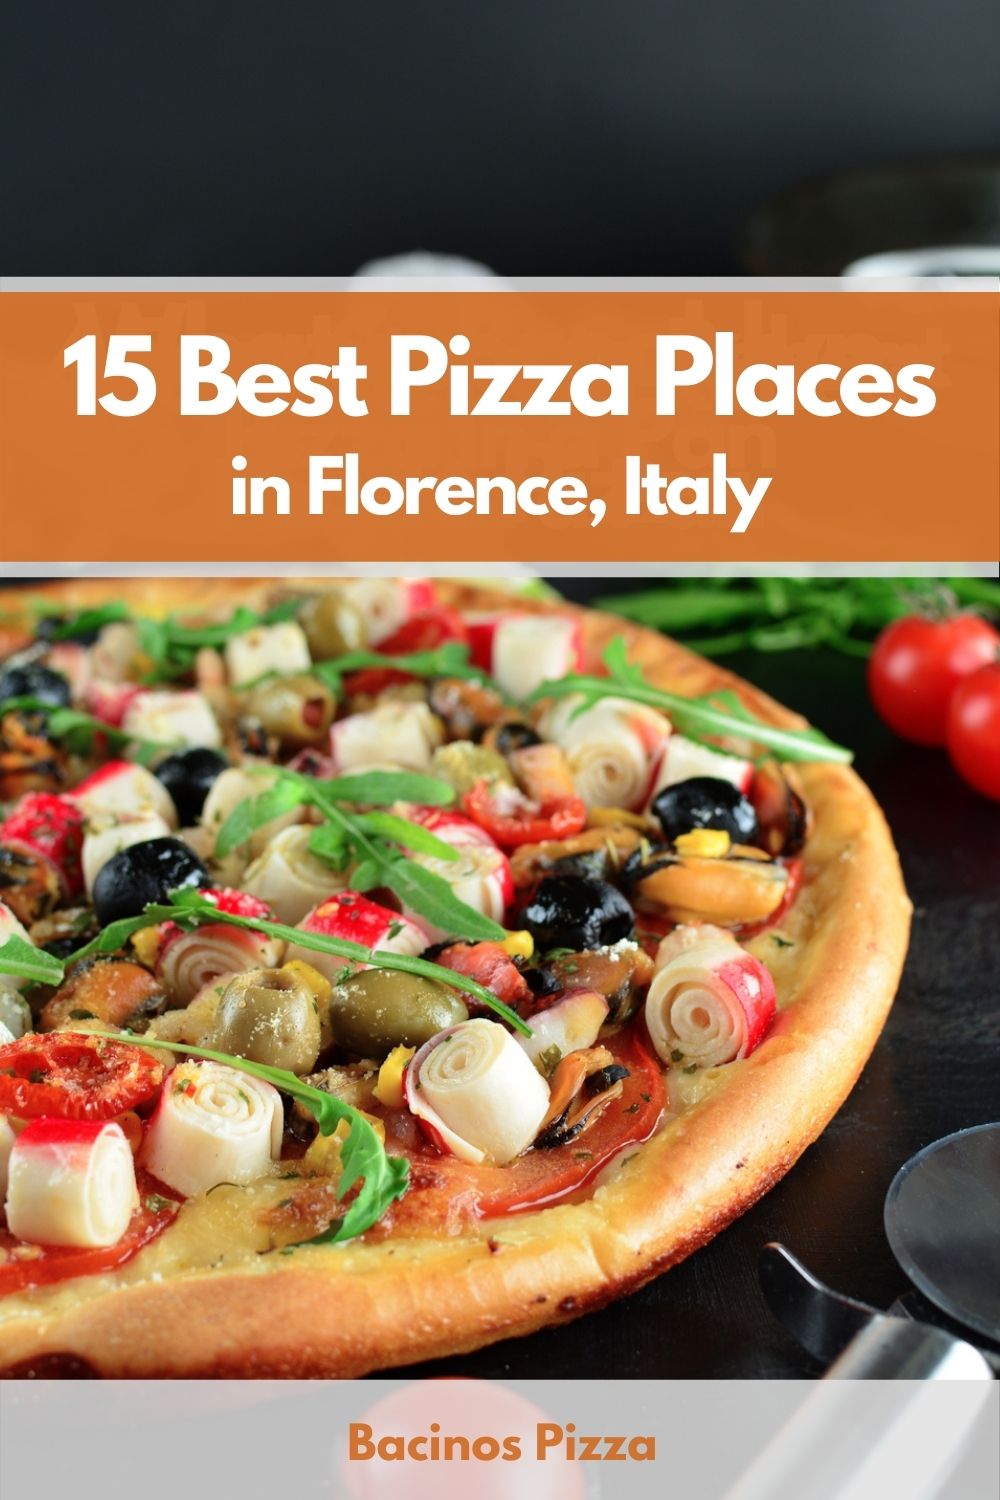 15 Best Pizza Places in Florence, Italy pin 2